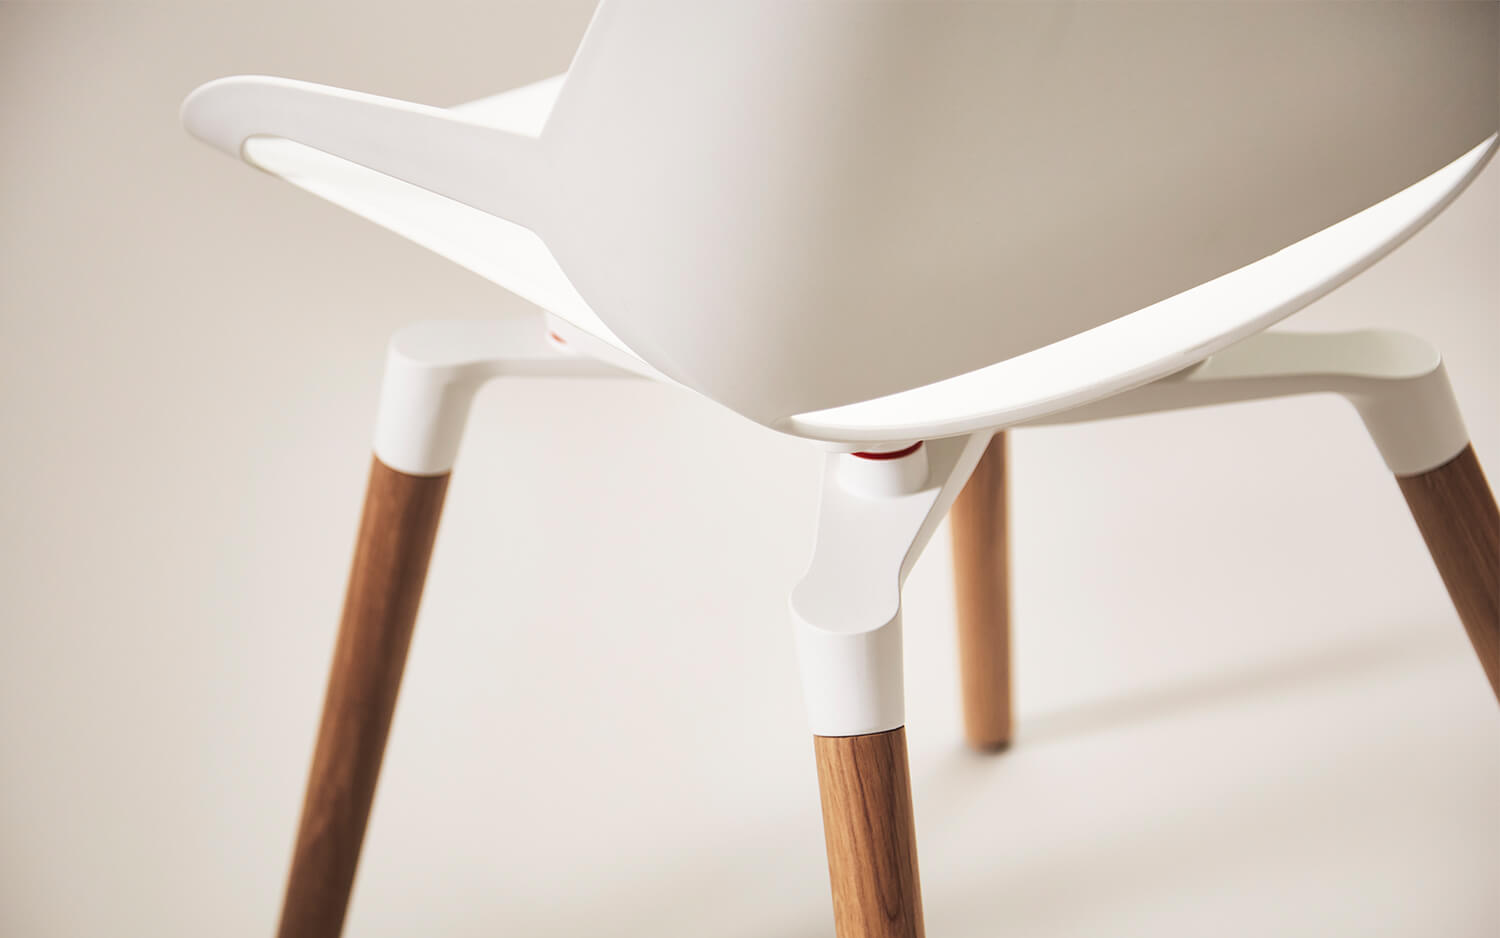 Aeris Numo design chair with wooden legs and white seat shell